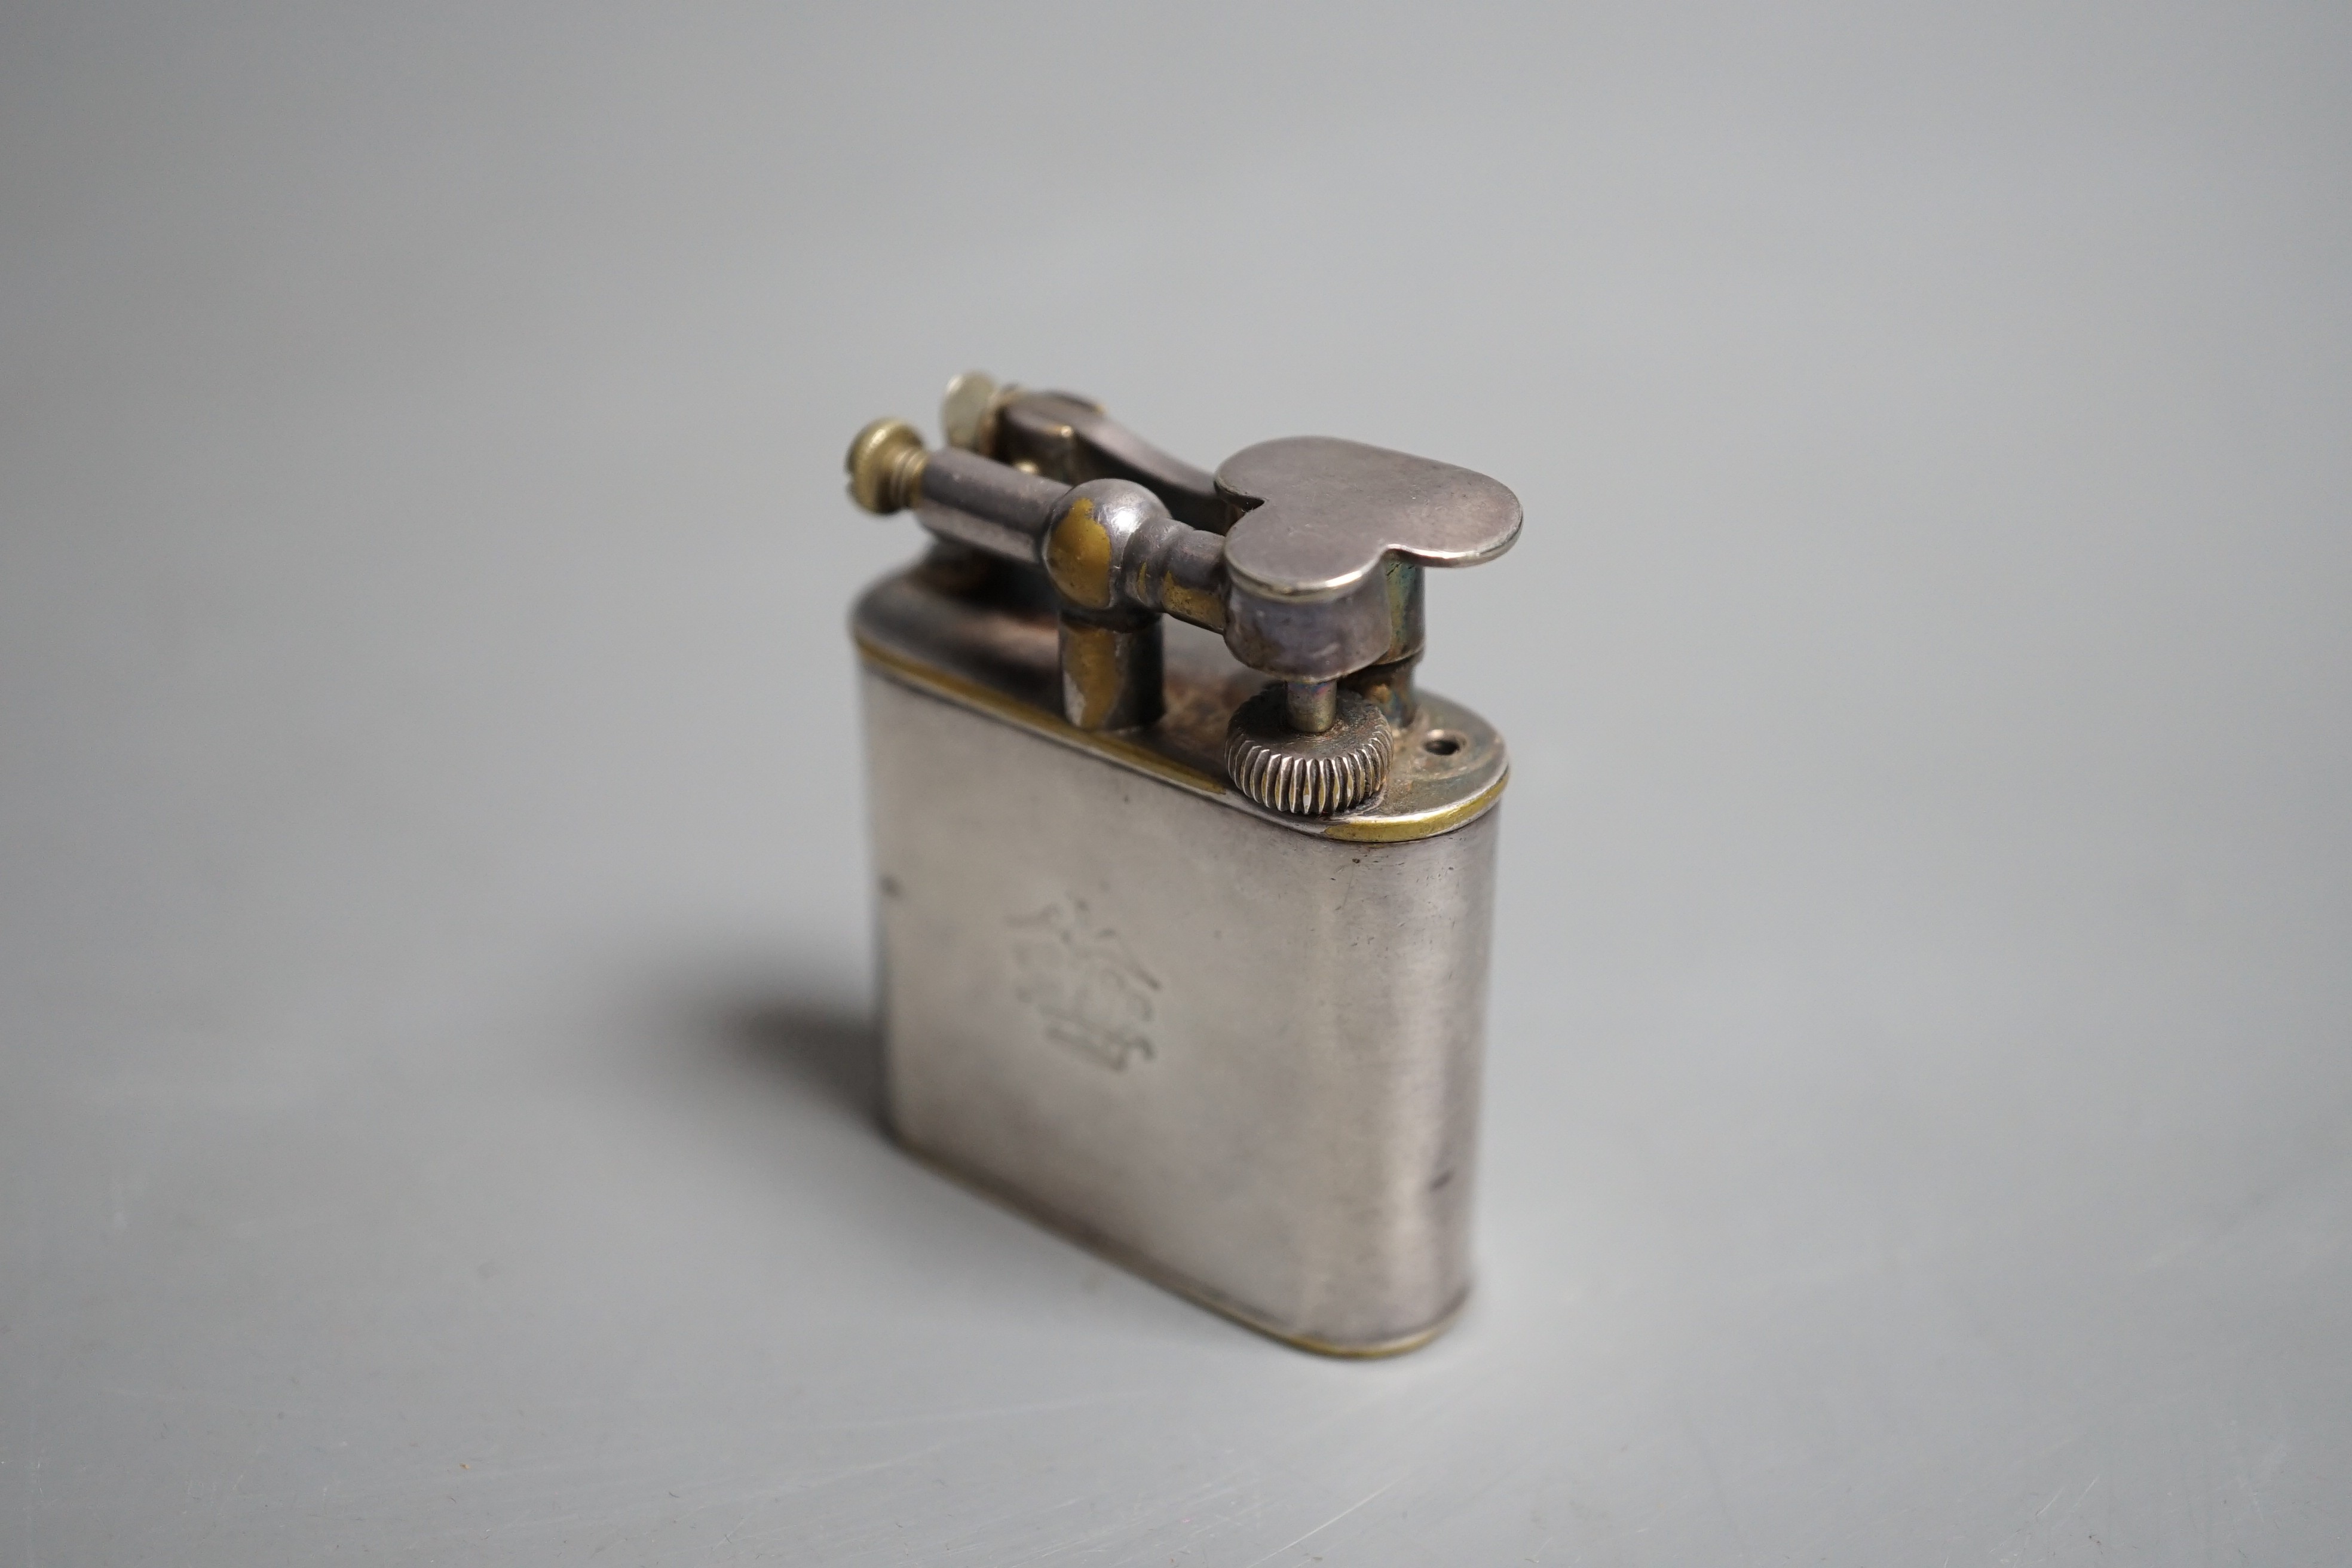 A vintage 1930’s Dunhill Unique Sports plated nickel cigarette lighter.